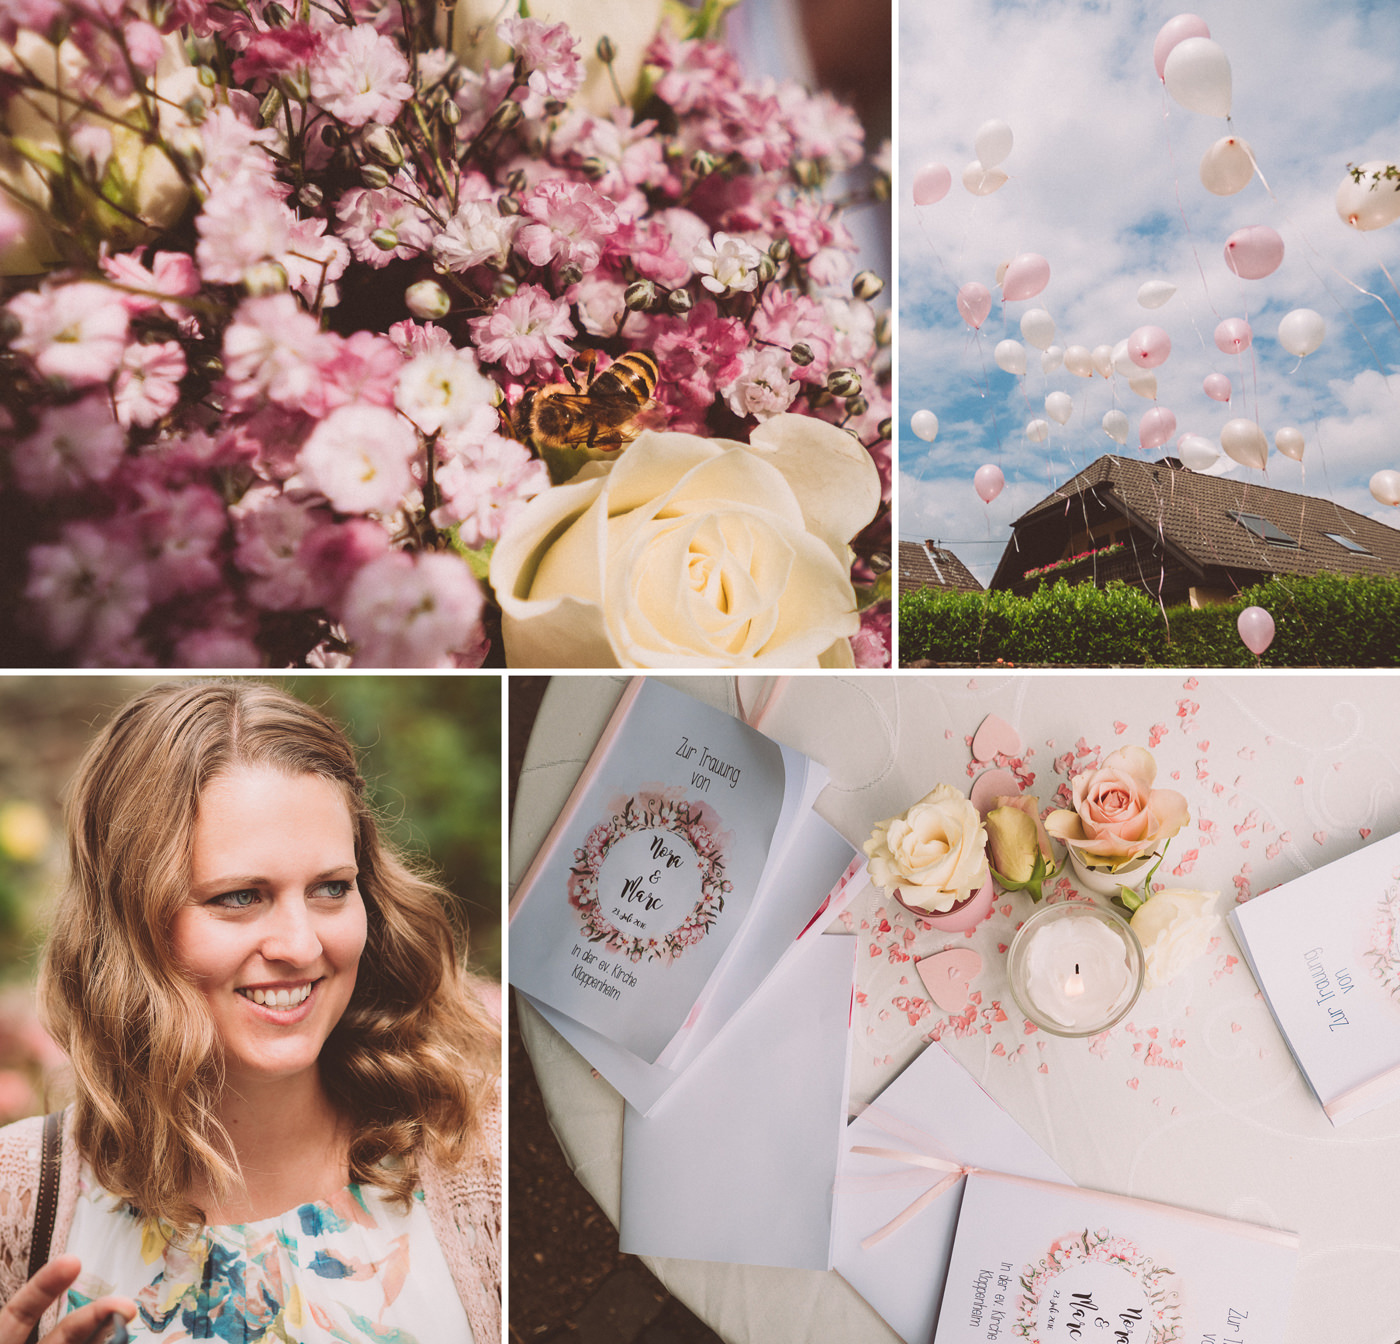 Wedding at Hofgut Georgenthal - a fairytale wedding with fantastic portraits in the hills of the Taunus